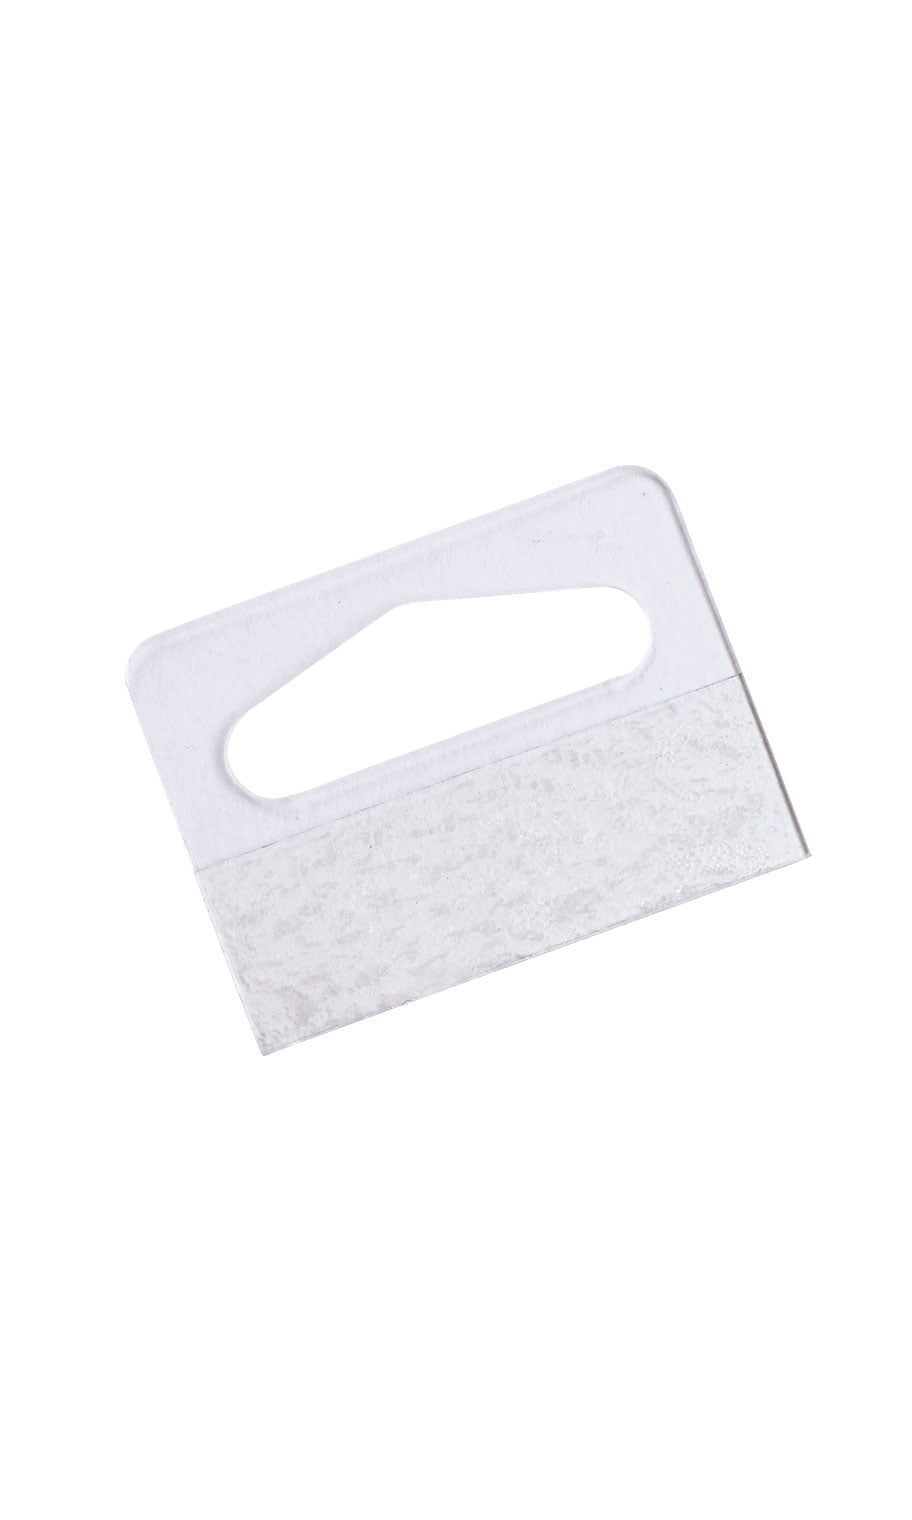 20 Tabs 1.75" x 1.5" DURABLE CLEAR  PLASTIC HANG TABS with HEAVY DUTY ADHESIVE 